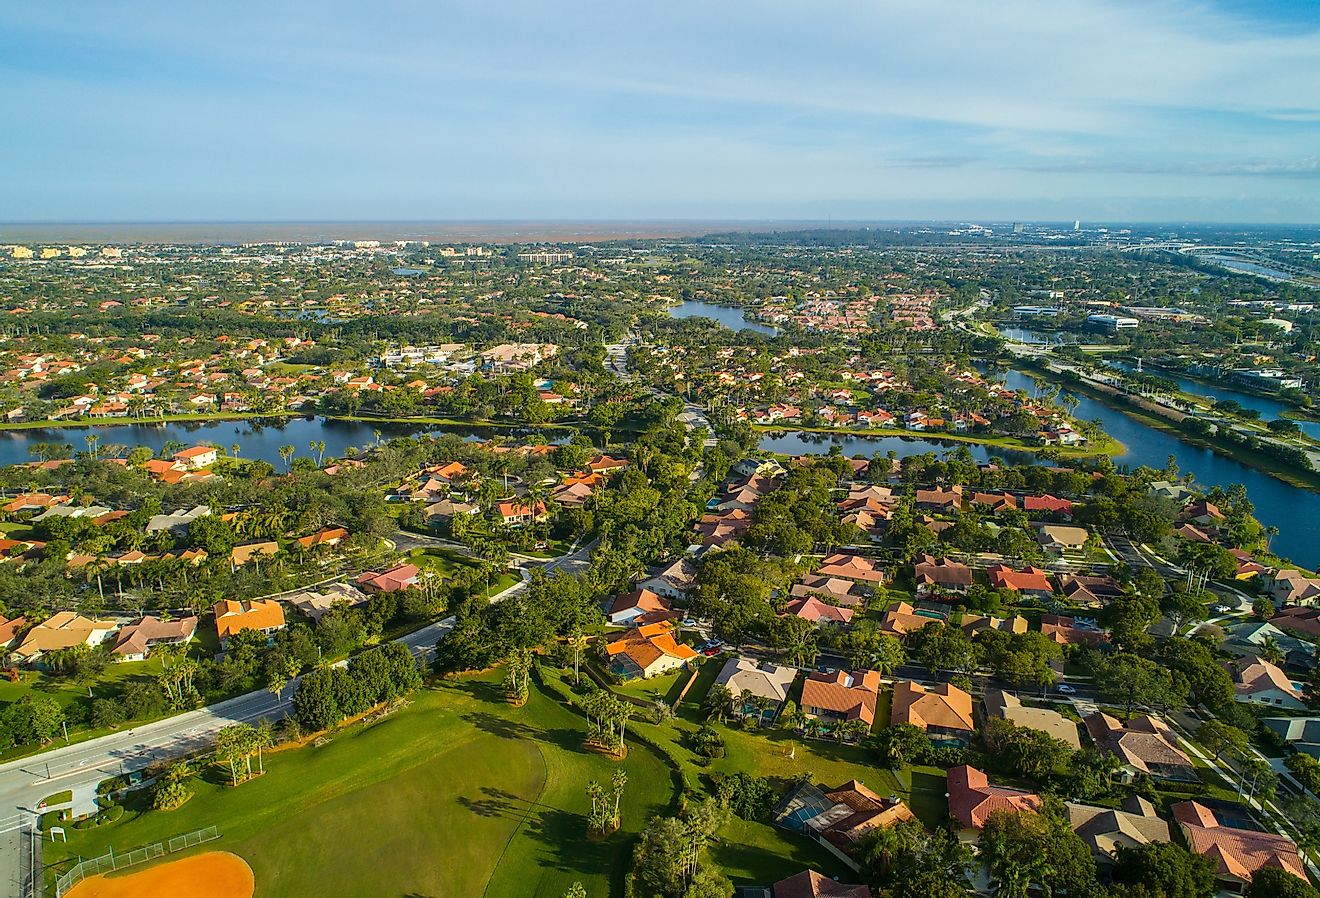 Aerial view of luxurious homes in Weston, Florida.